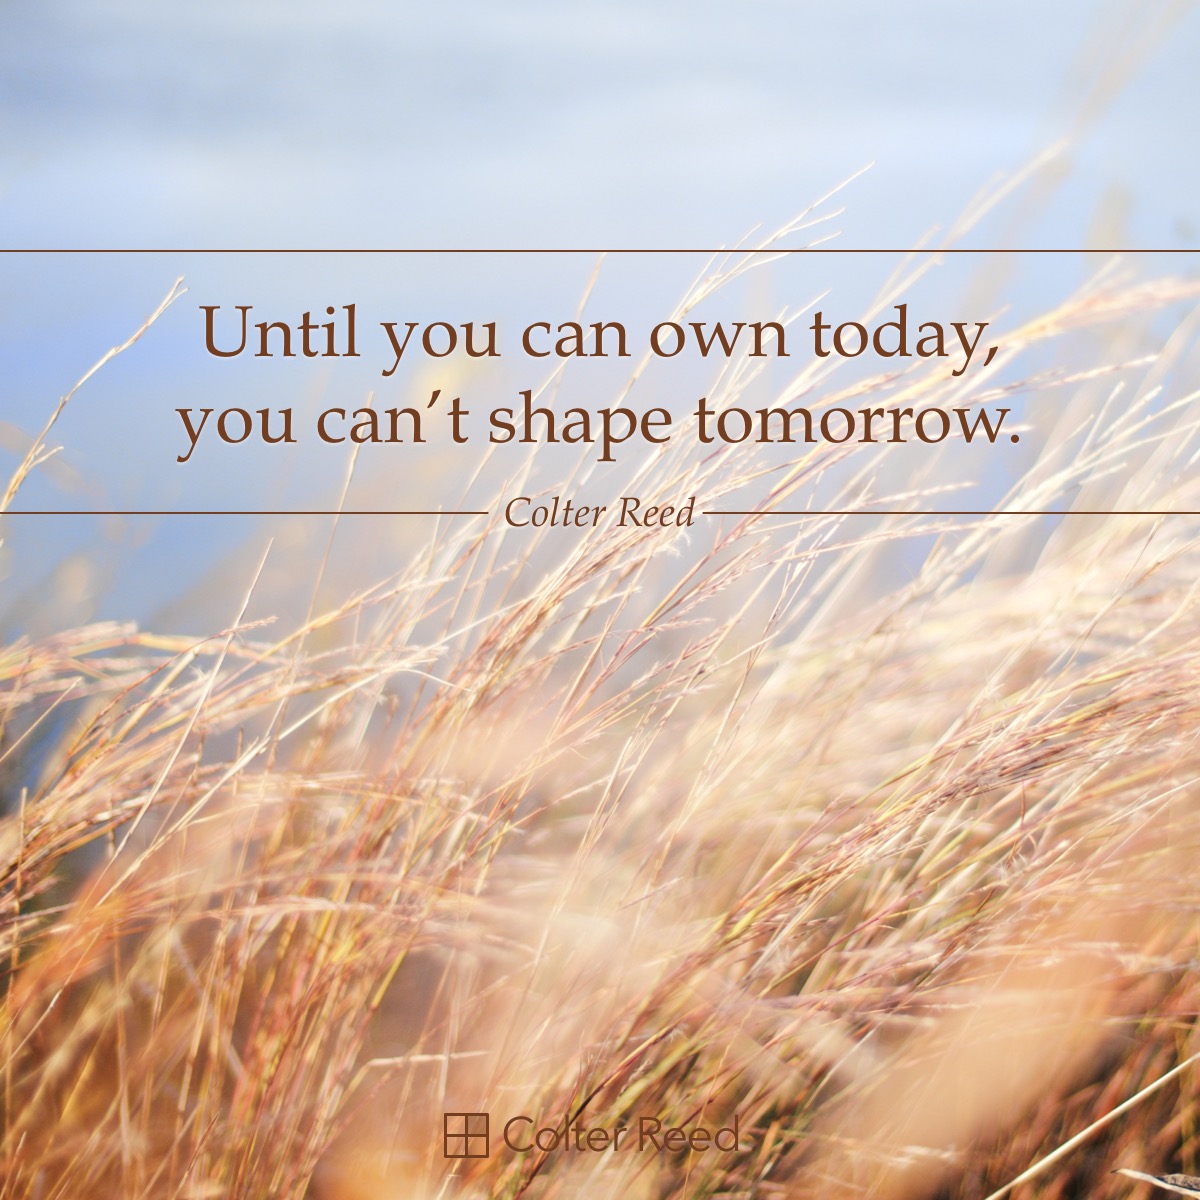 Until you own today, you can’t shape tomorrow.